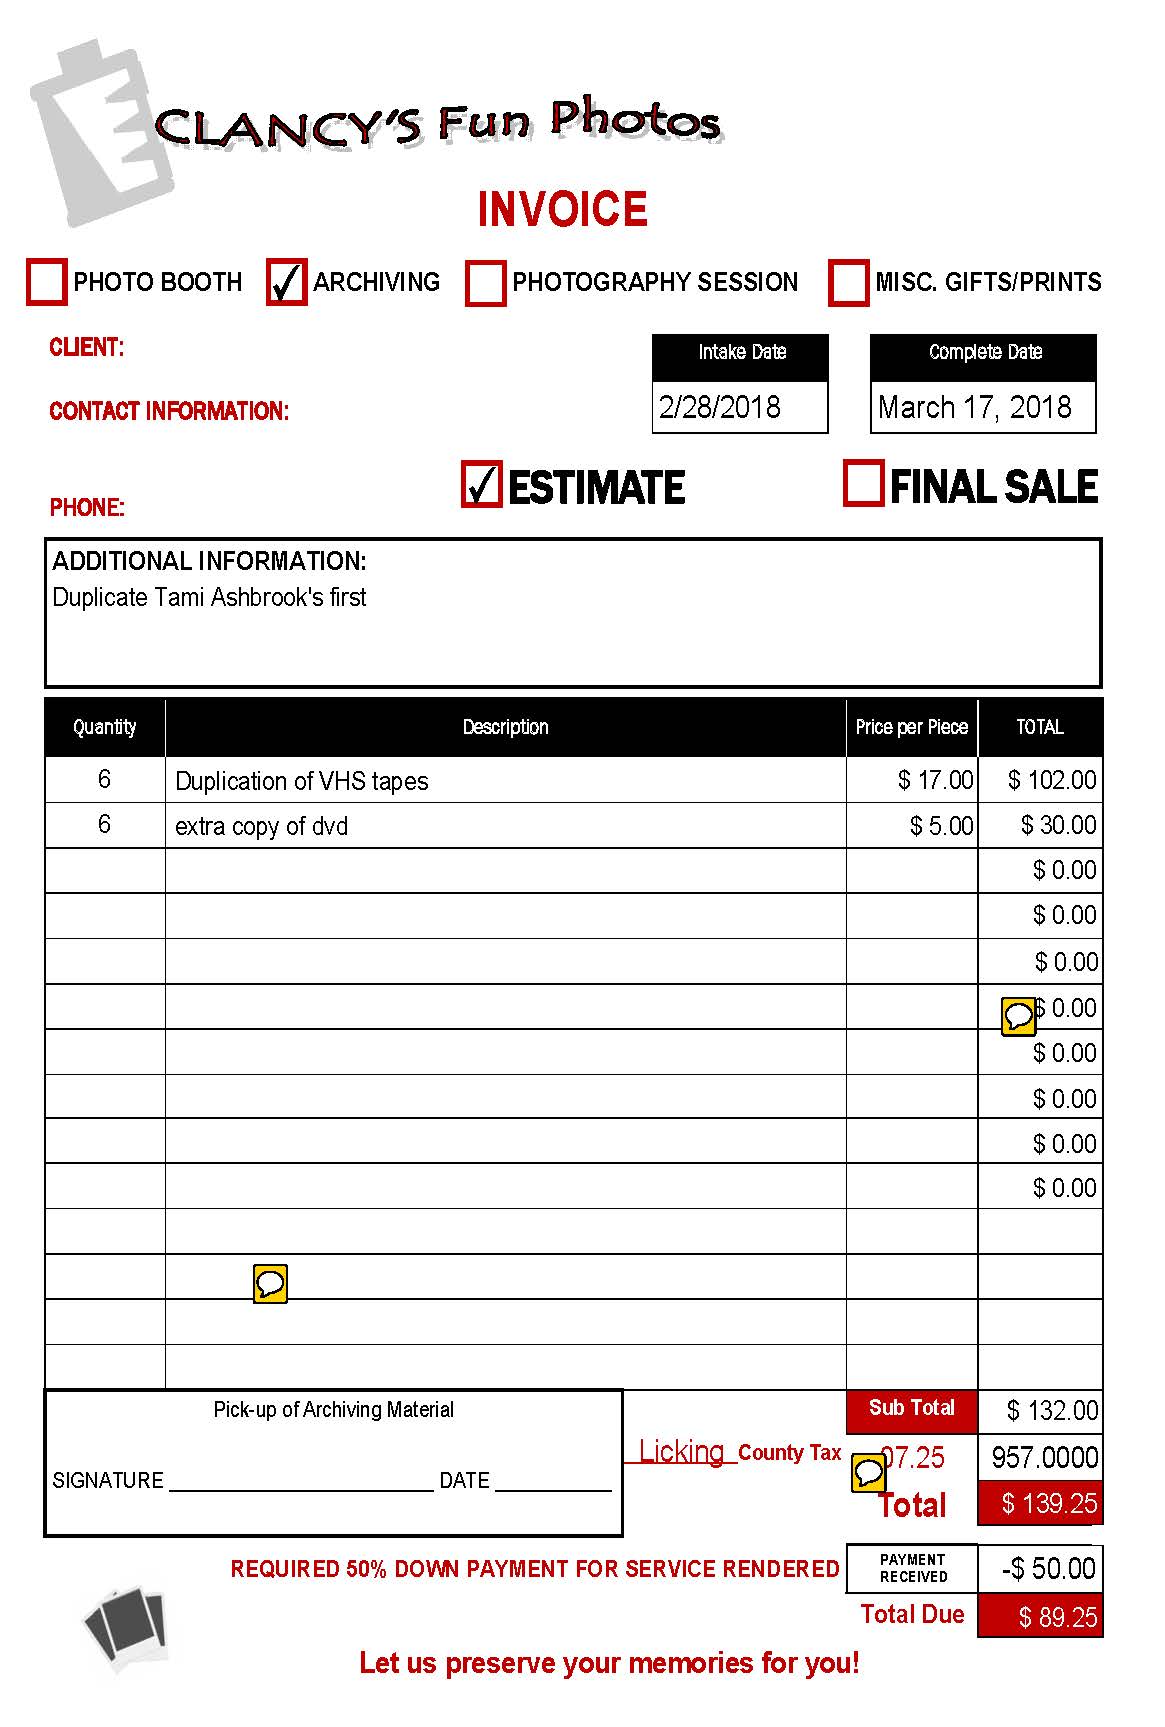 clancy invoice 3-8-2018 NEWEST a - Copytry this.jpg